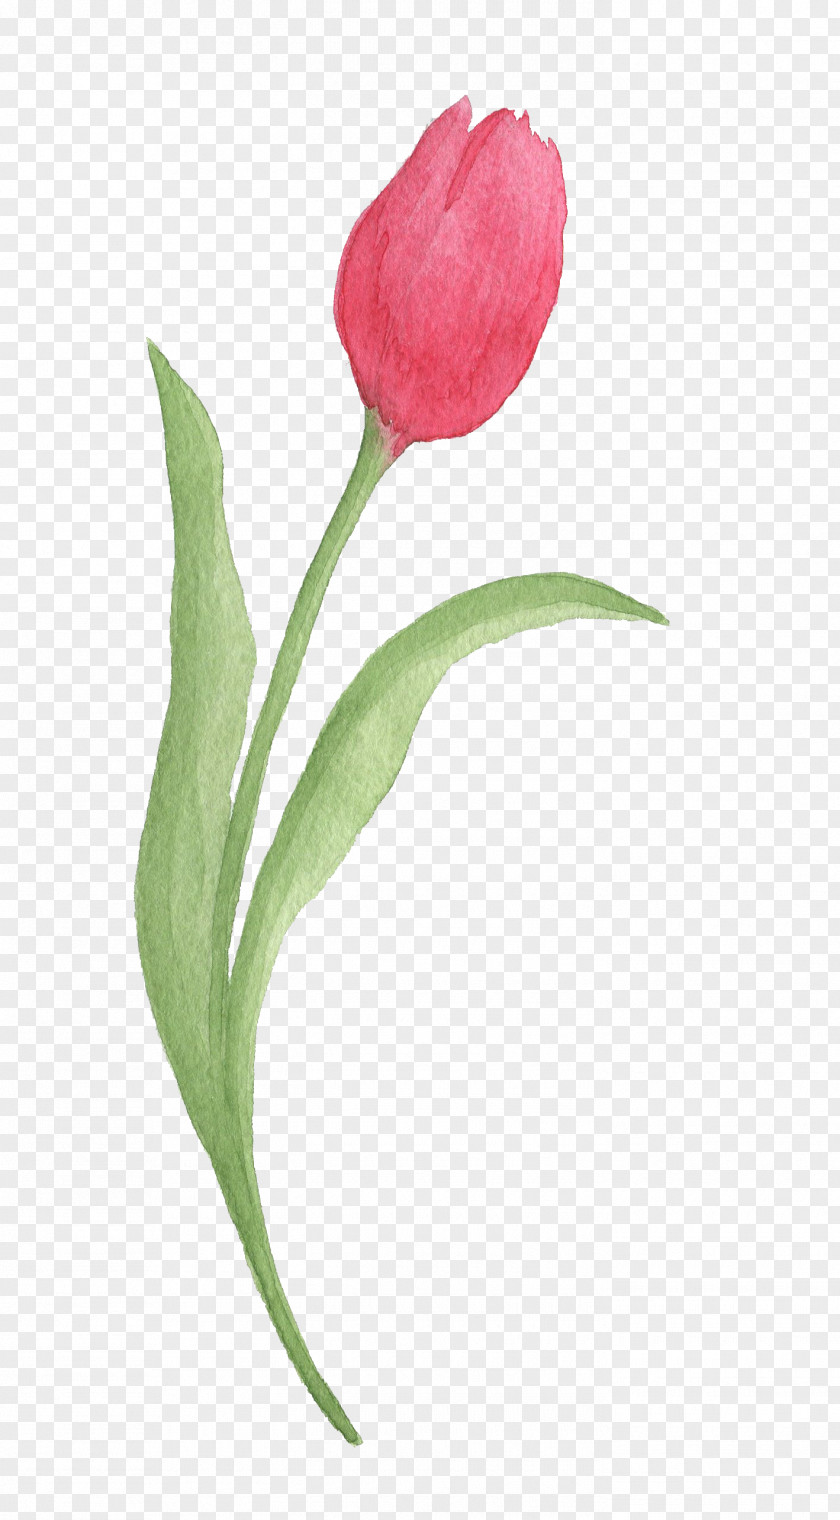 Red Tulips Tulip Watercolor Painting Download PNG